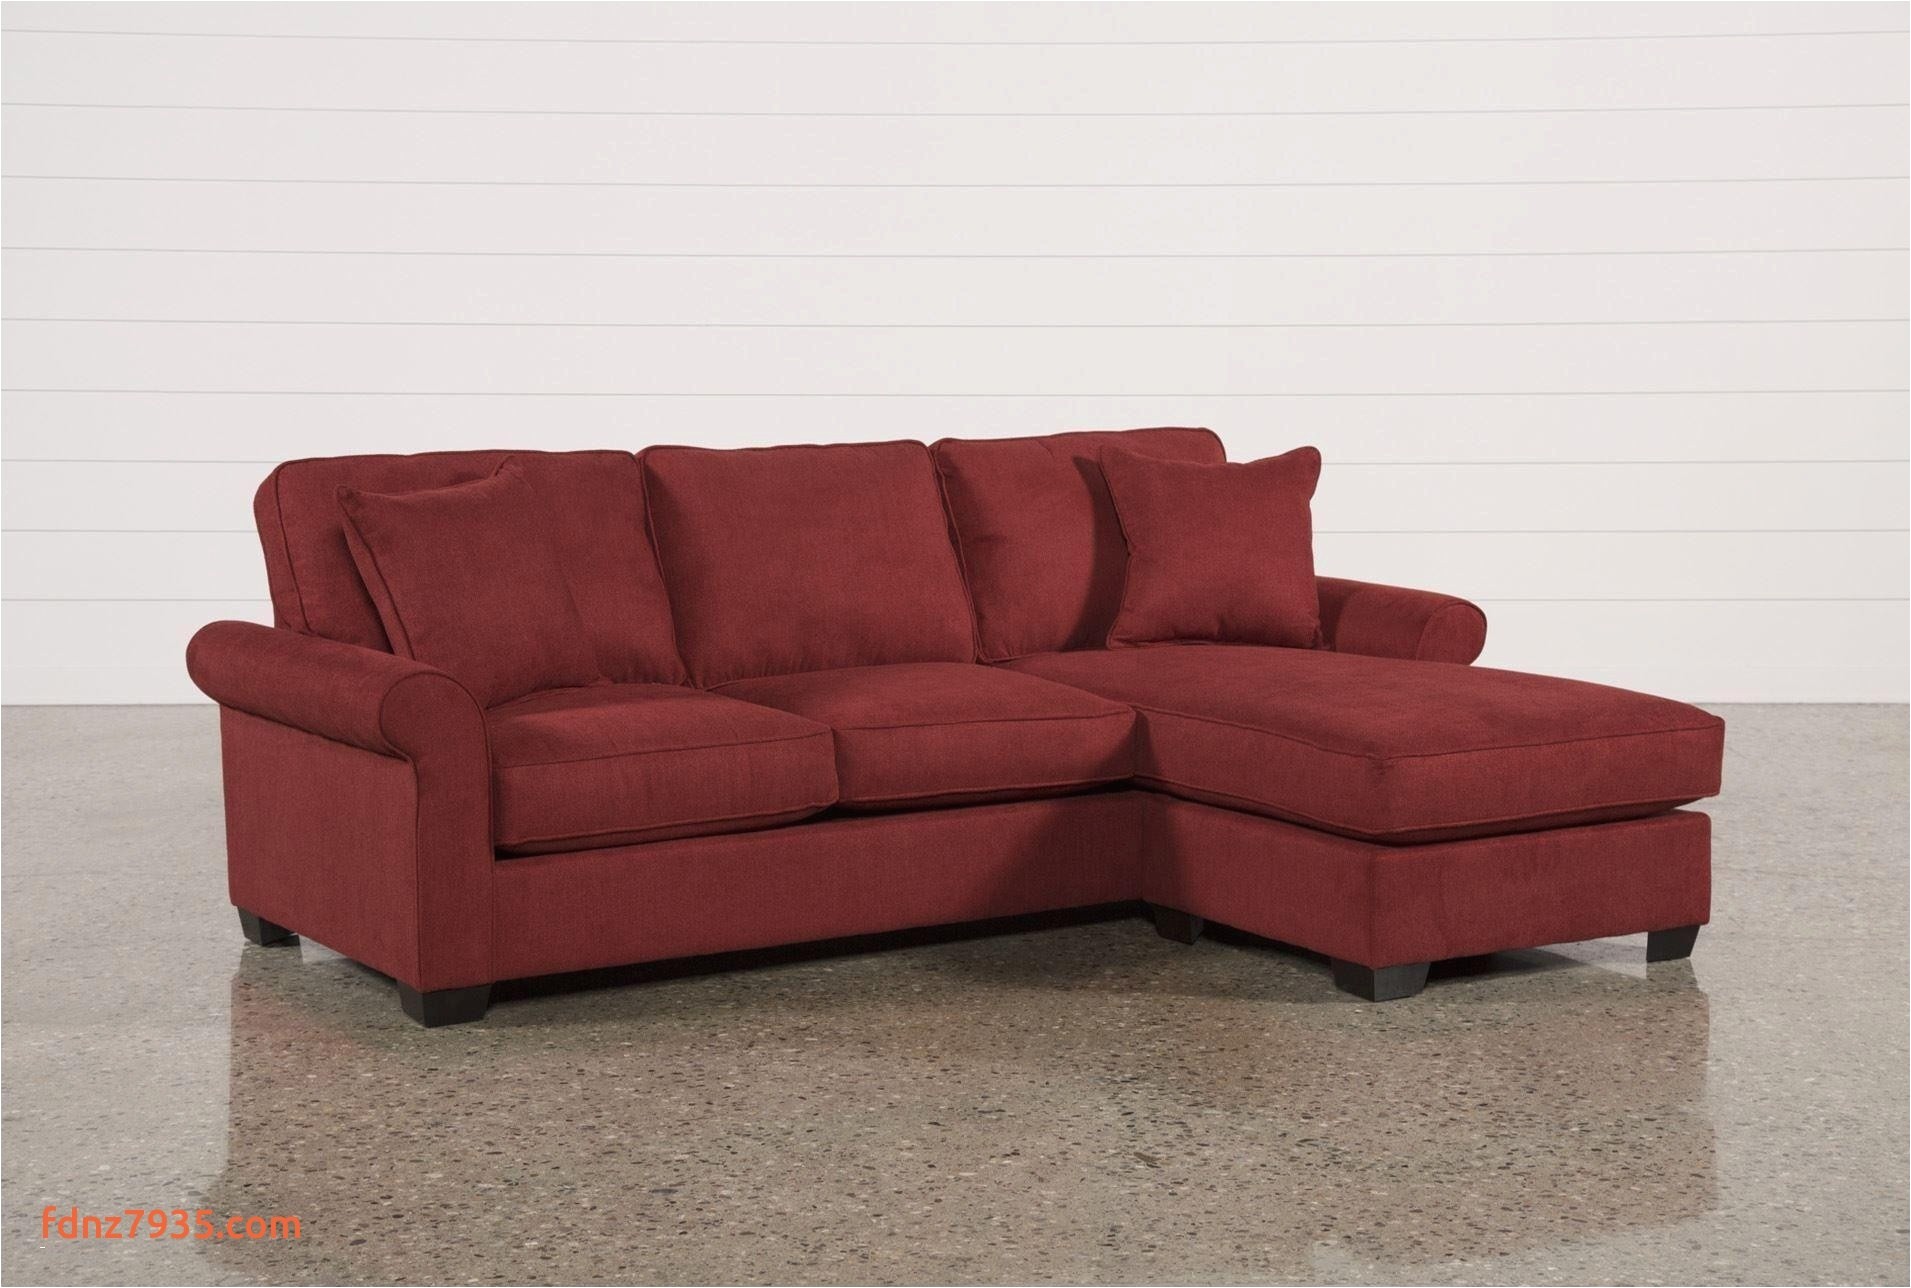 Best Rated Sectional Sleeper sofas Sectional Sleeper sofa with Storage Fresh sofa Design